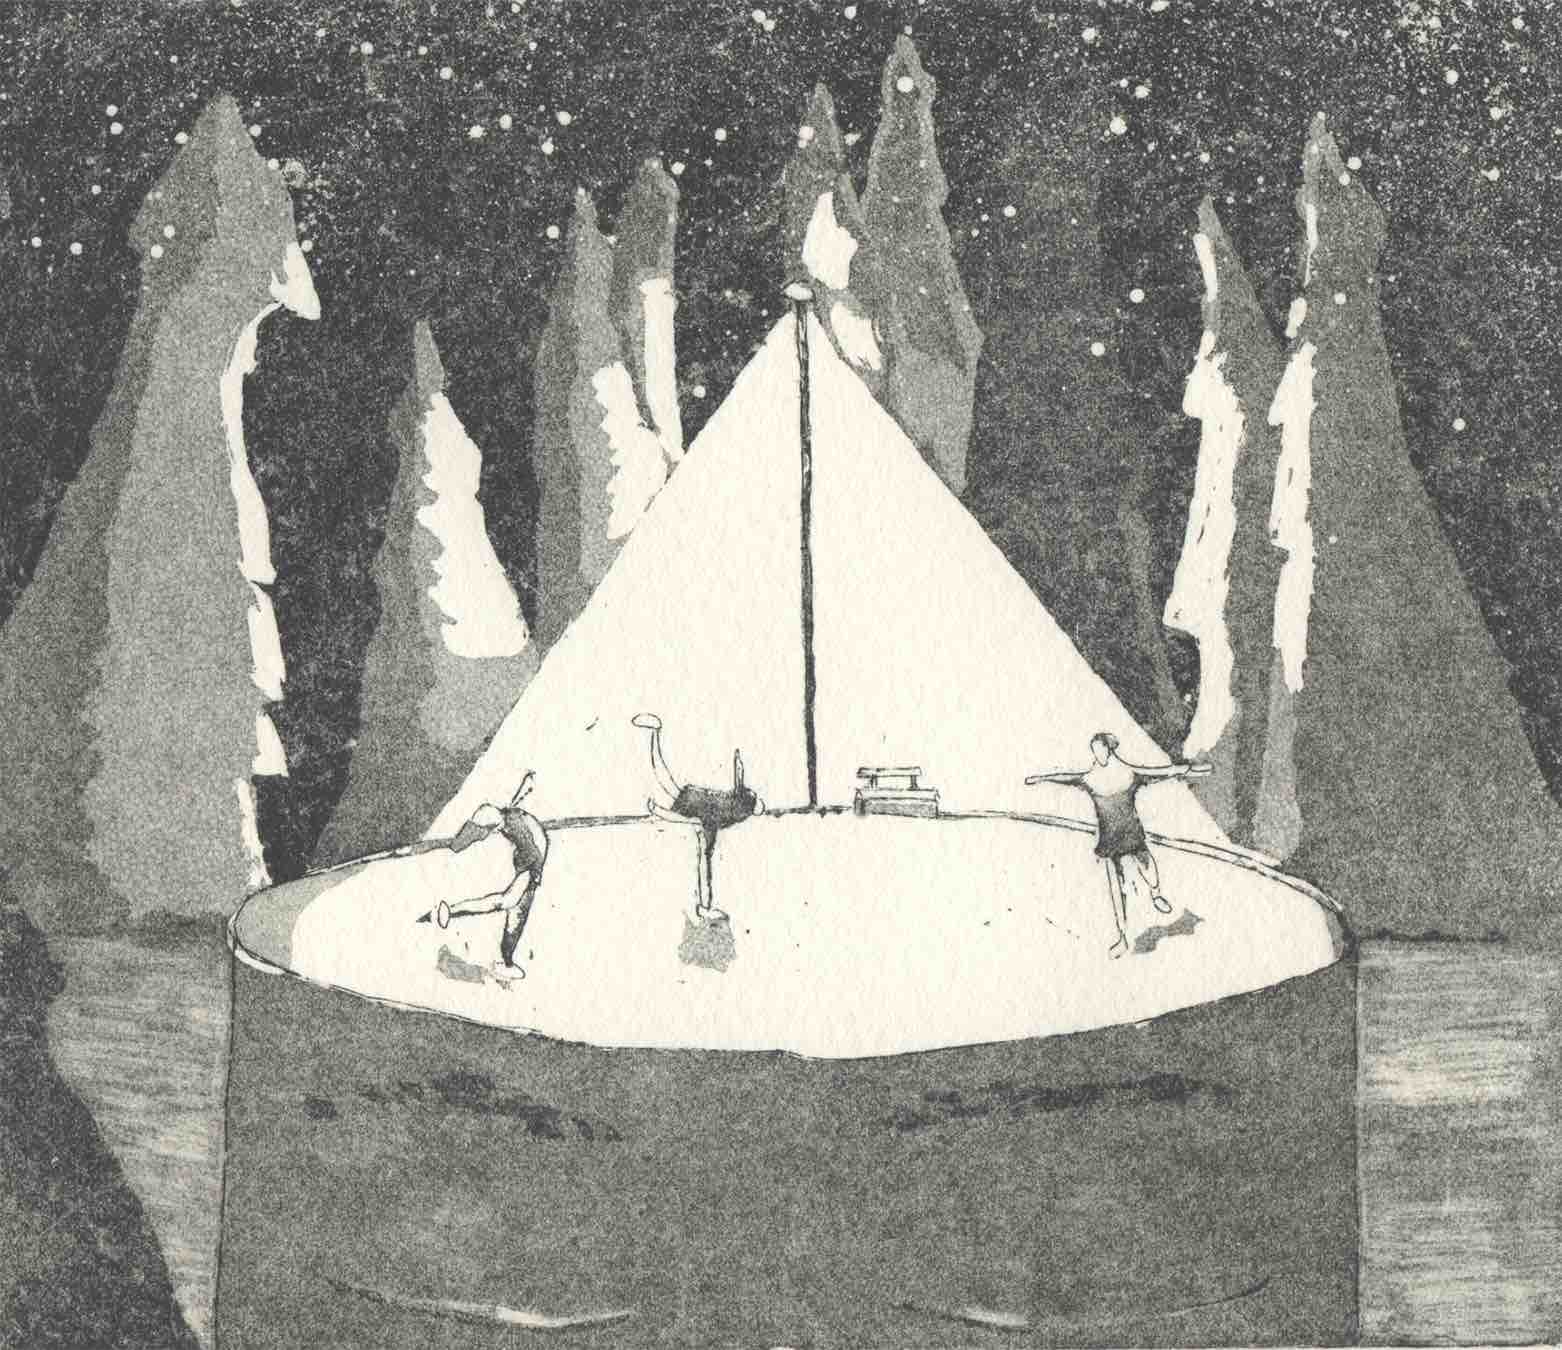 This quiet but joyful print shows 3 figures figure-skating atop the lopped-off skullcap of a sleeping person. They are brilliantly illuminated by a single streetlamp in the centre, casting a triangle of light over them. The sky is black and punctuated with stars. A stand of trees circling the scene is bathed in light on their inner sides, cast in shadow on their backs.